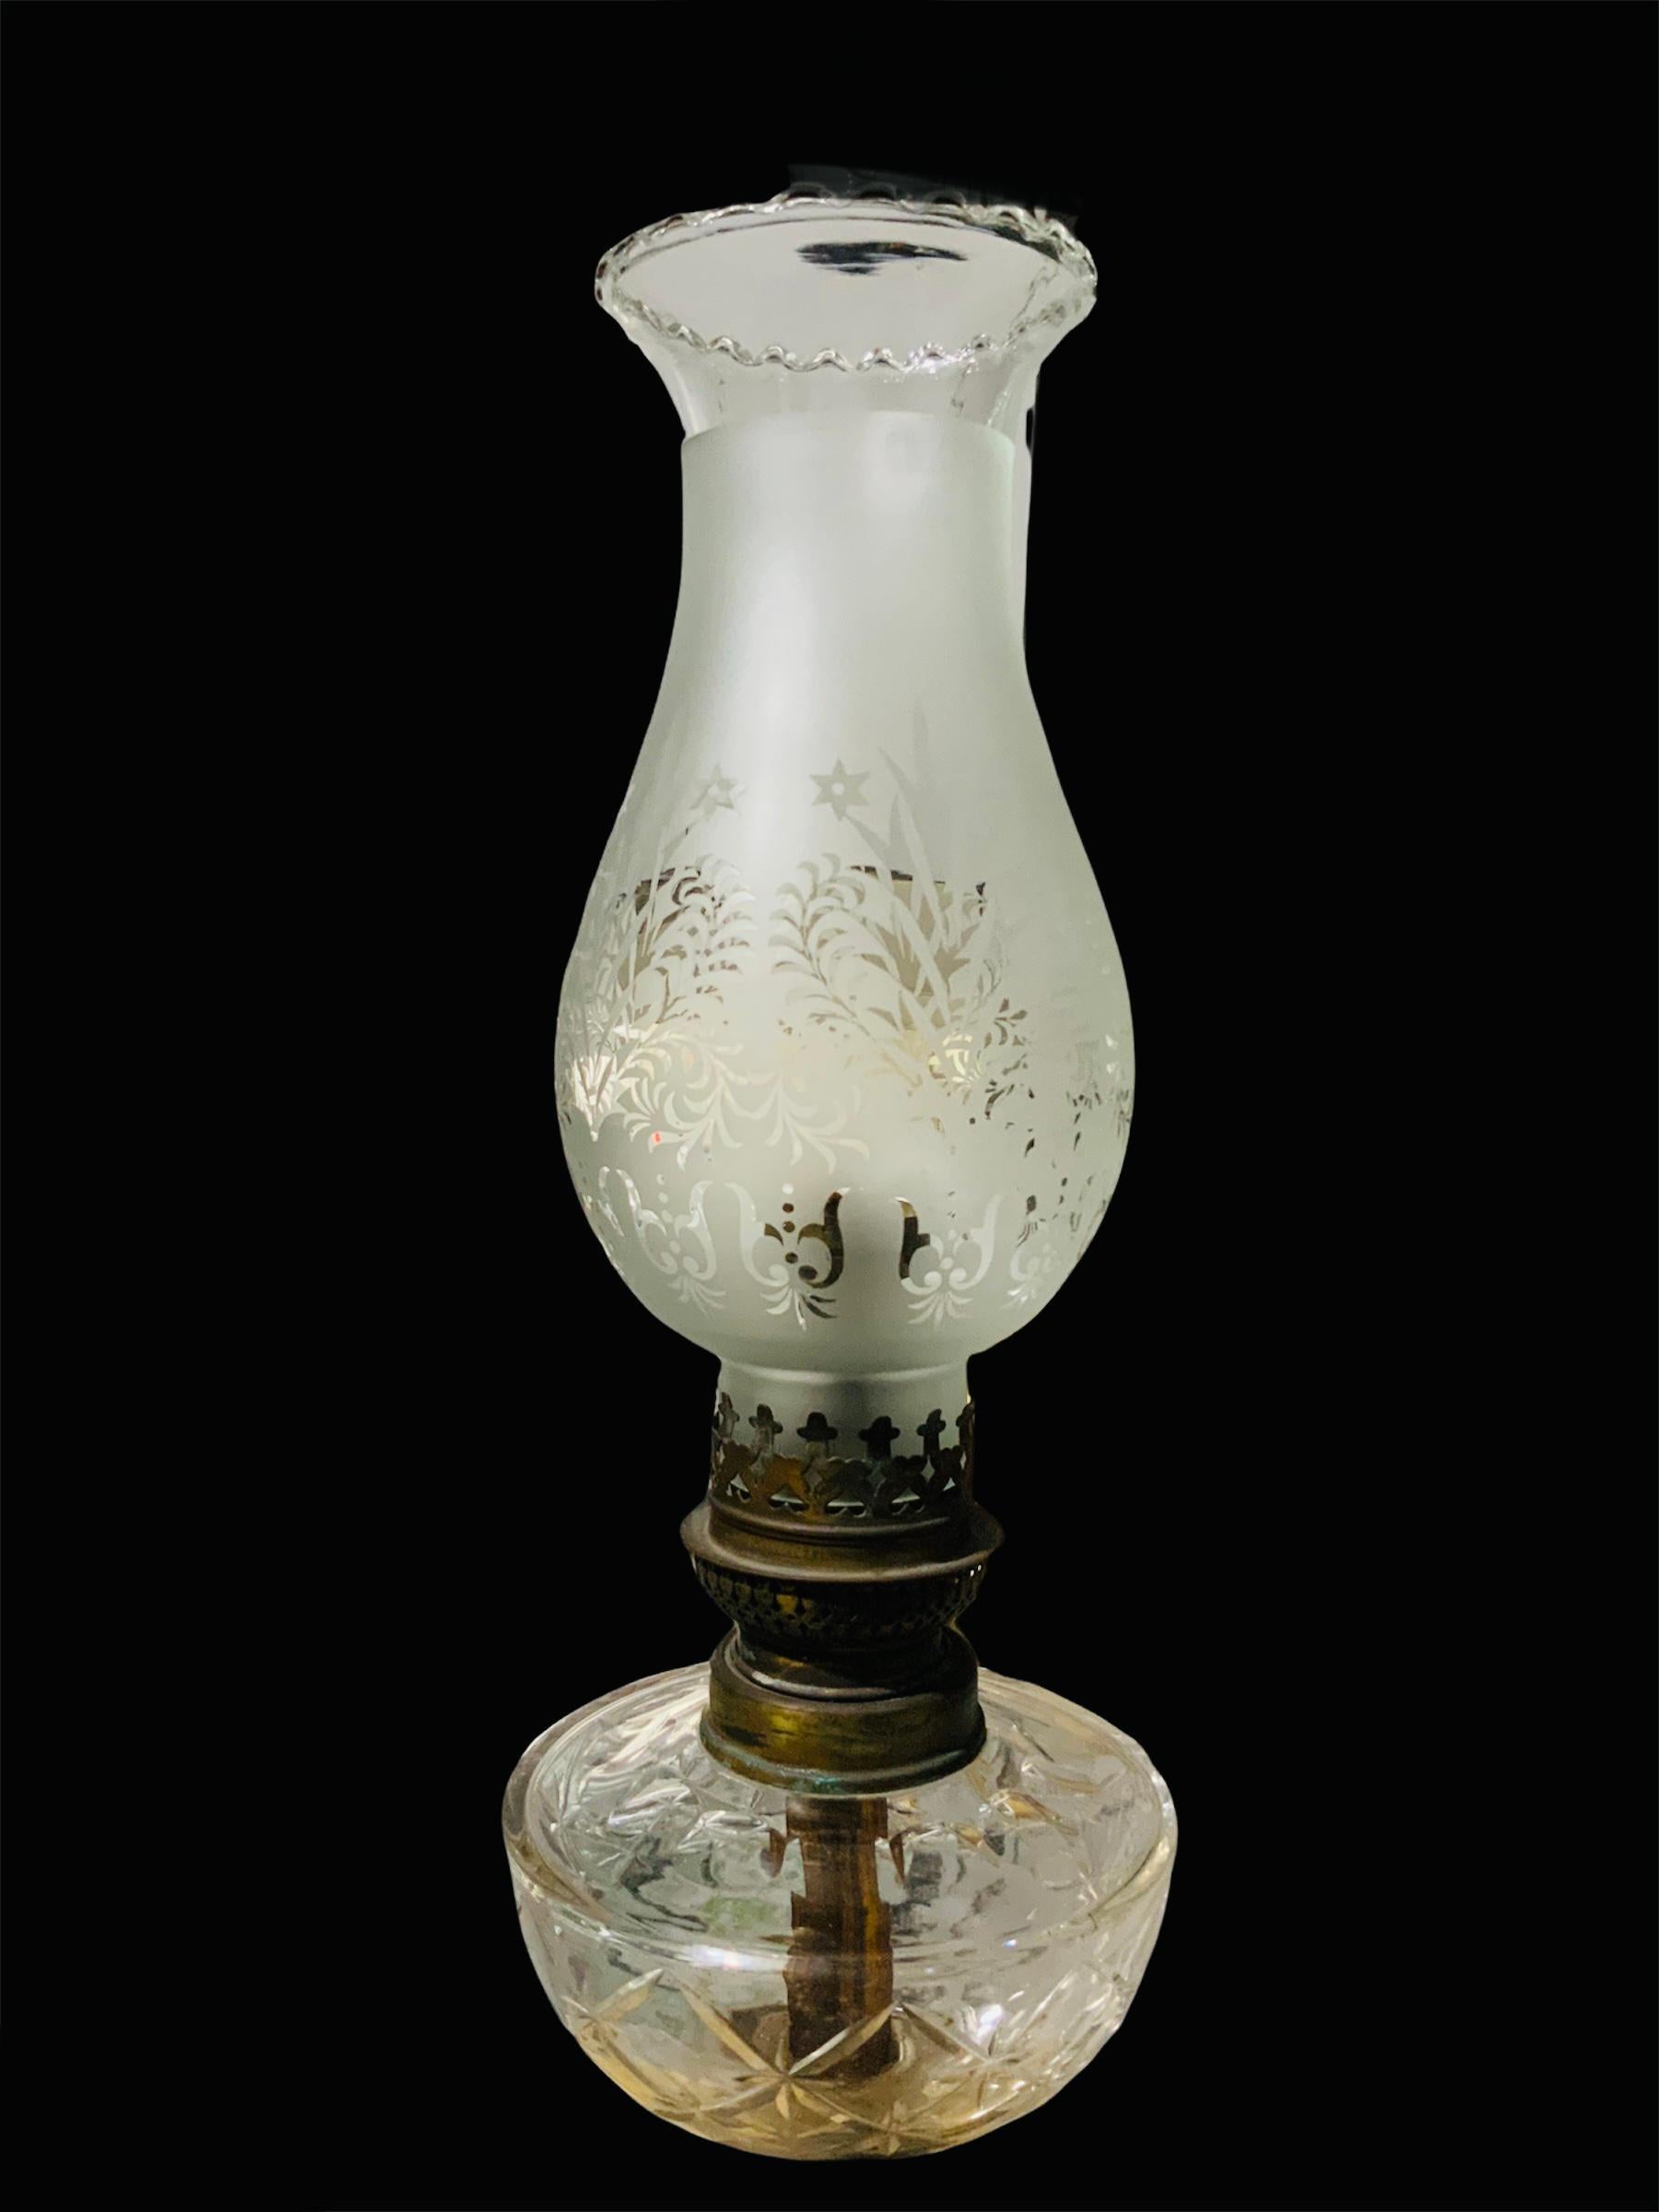 This is an elegant neoclassical column oil lamp that was electrified. The lamp consists of a tulip shaped frosted clear shade that is adorned with palmettos, foliage and stars. Below it, it is the brass burner followed by a cut crystal oil basin.